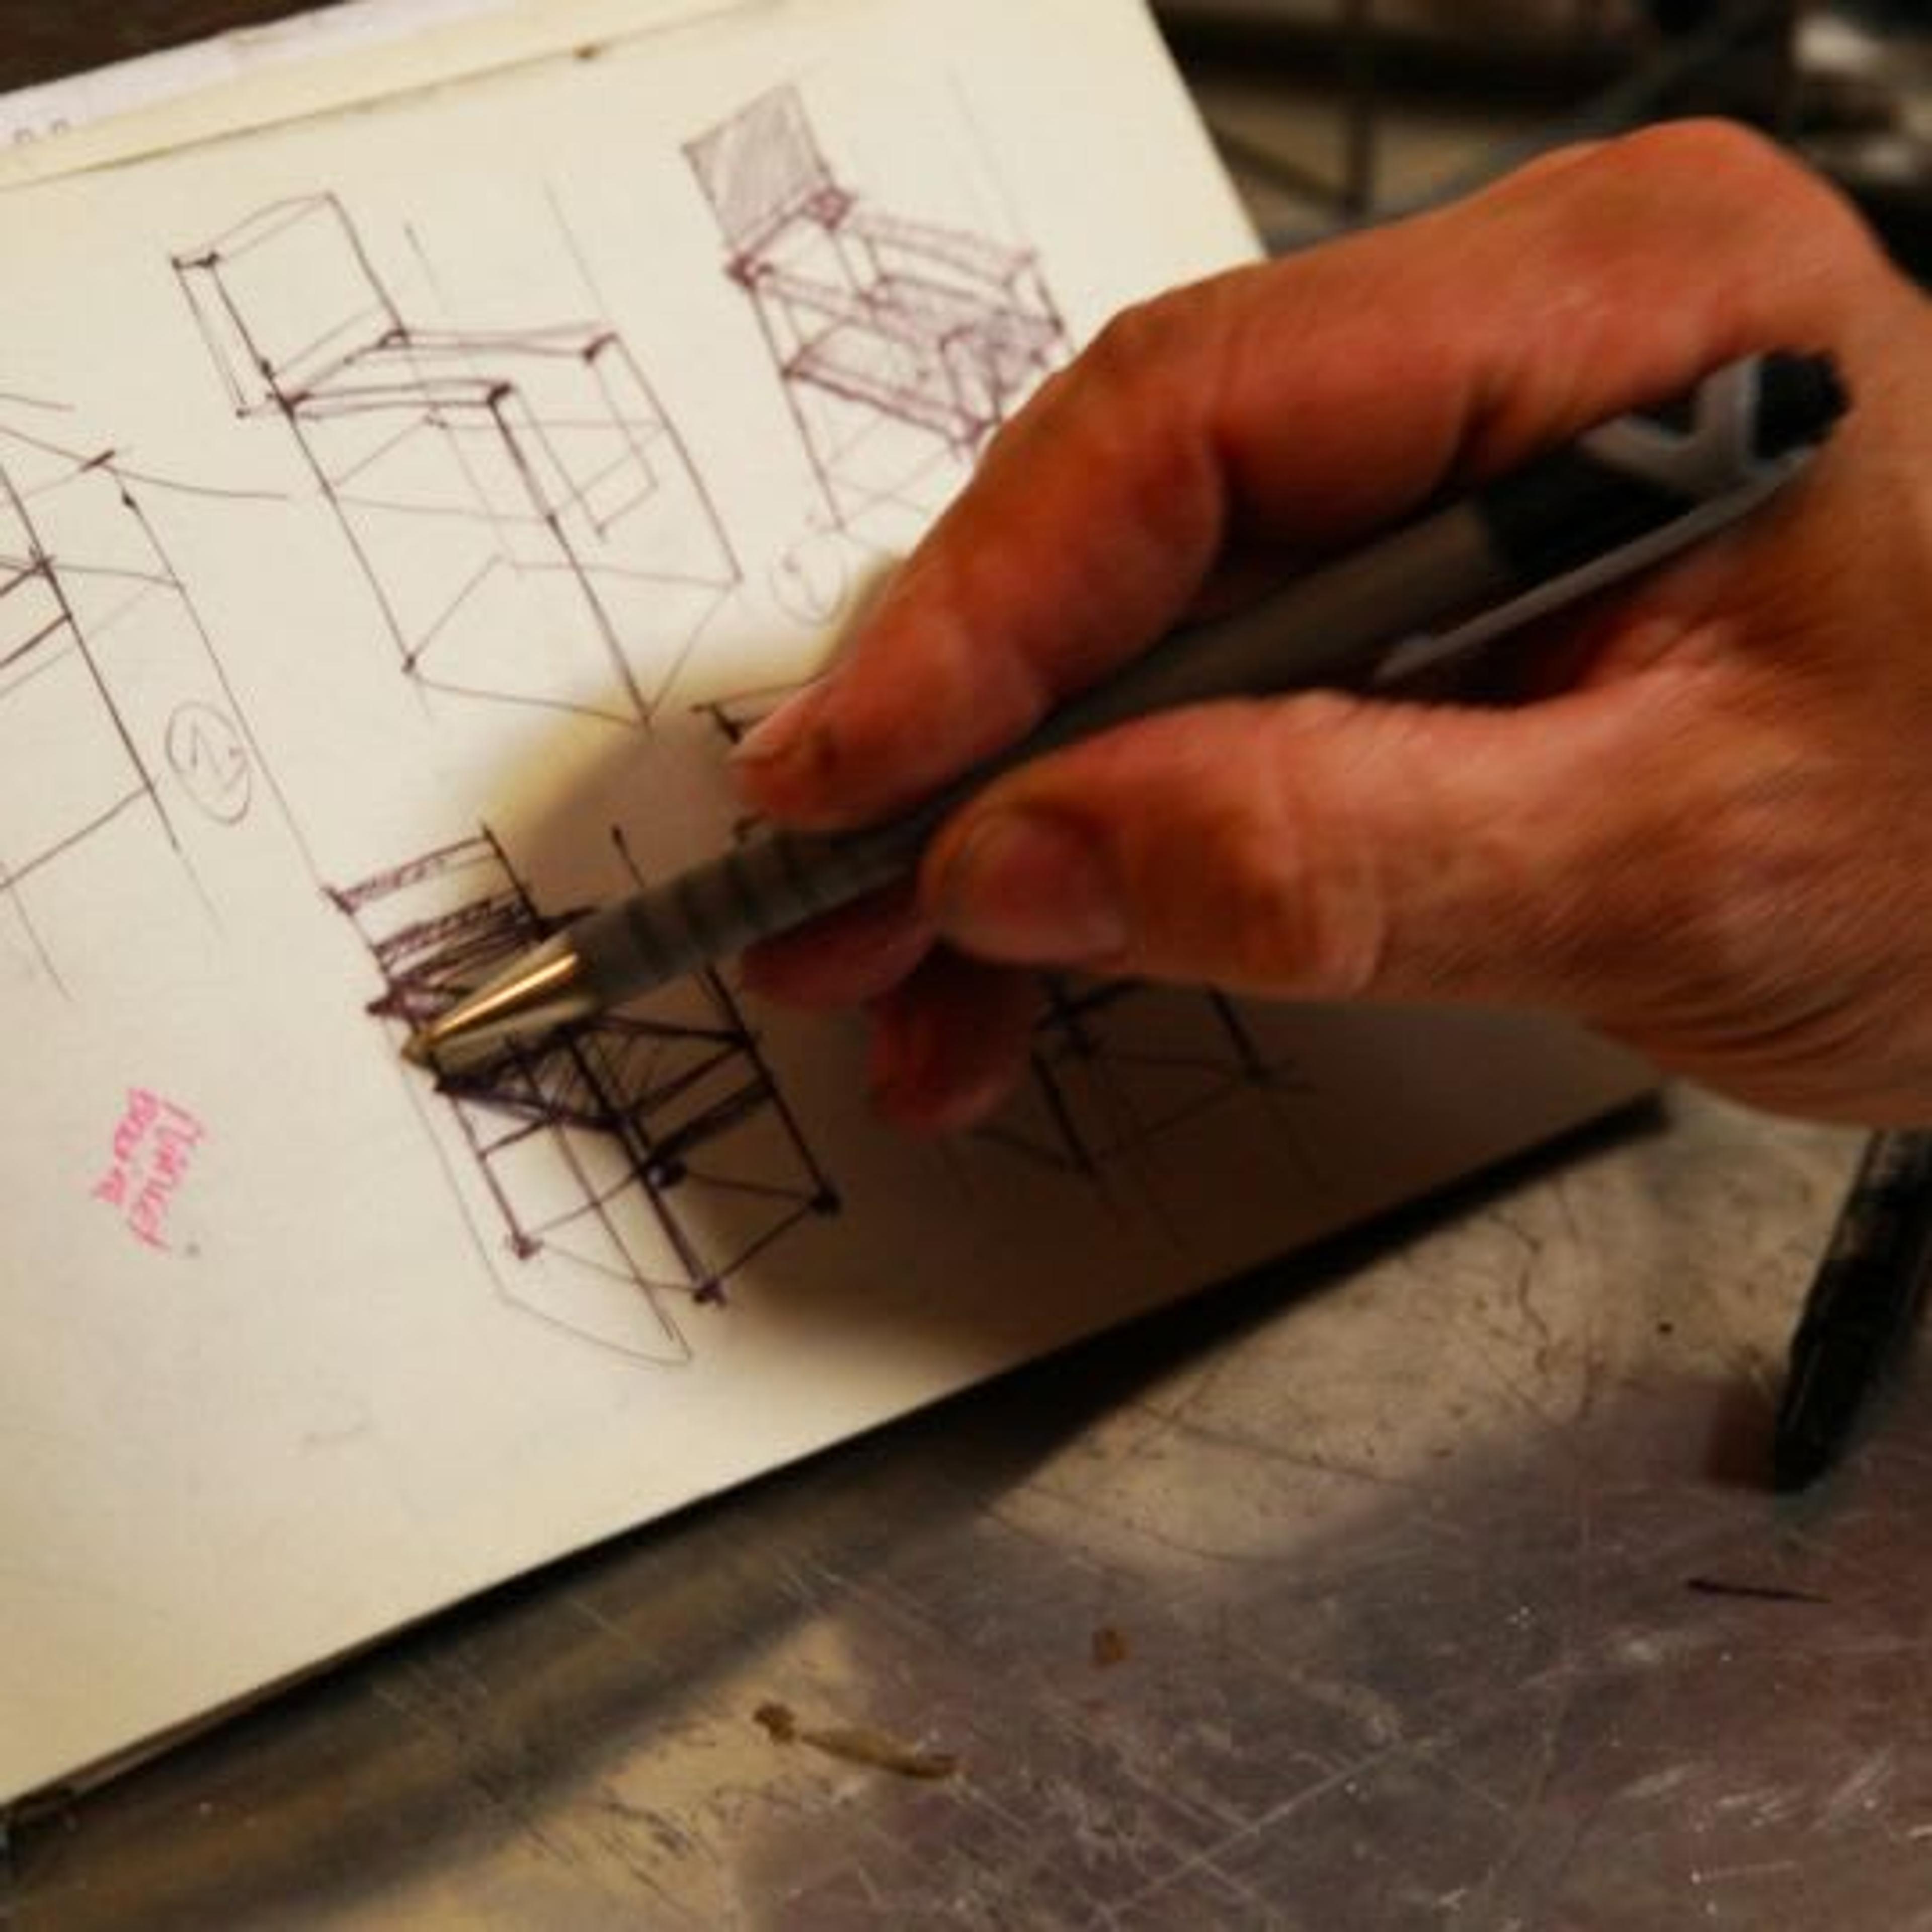 Paolo Calcagni designing his chairs